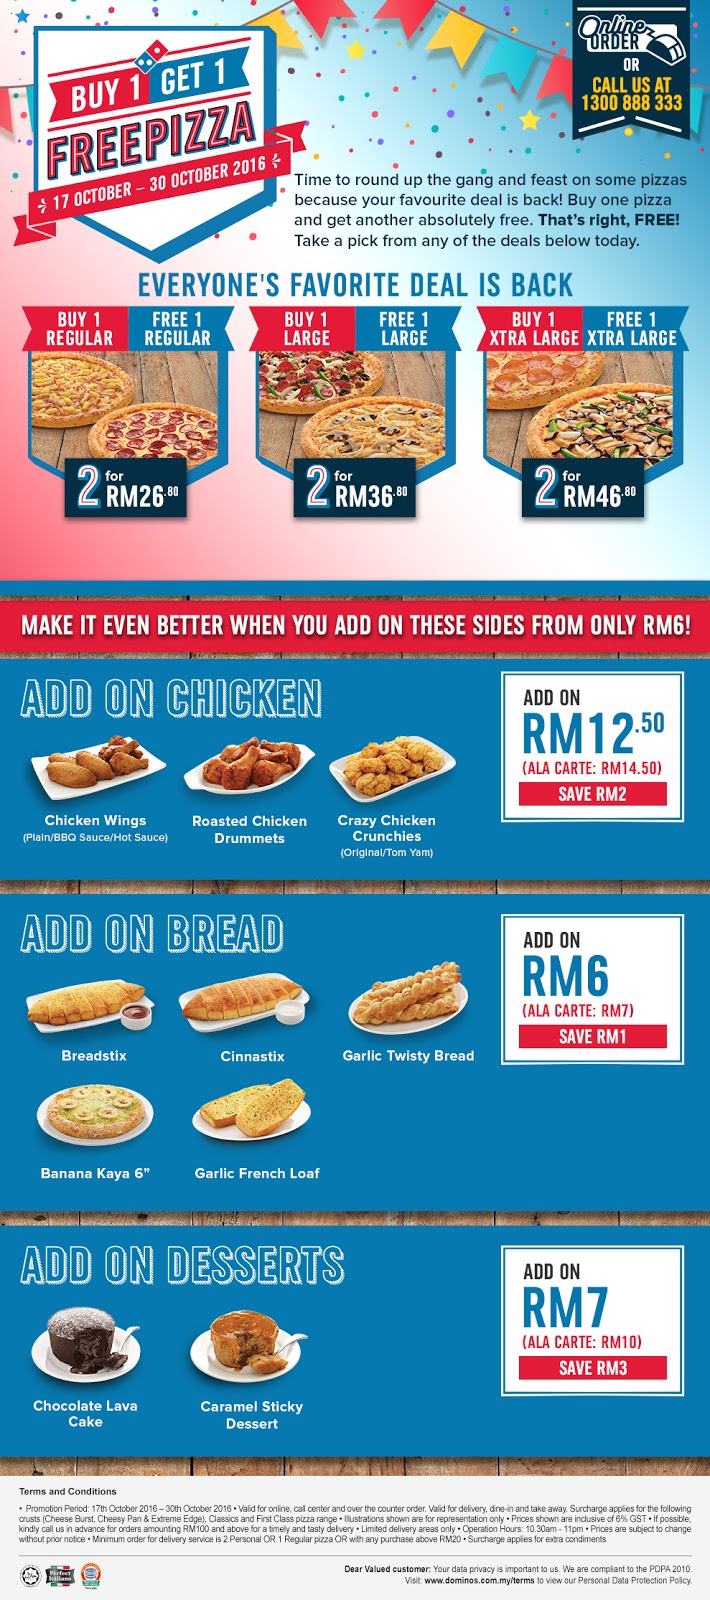 Domino's Pizza Buy 1 Free 1 Promotion 17 - 30 October 2016